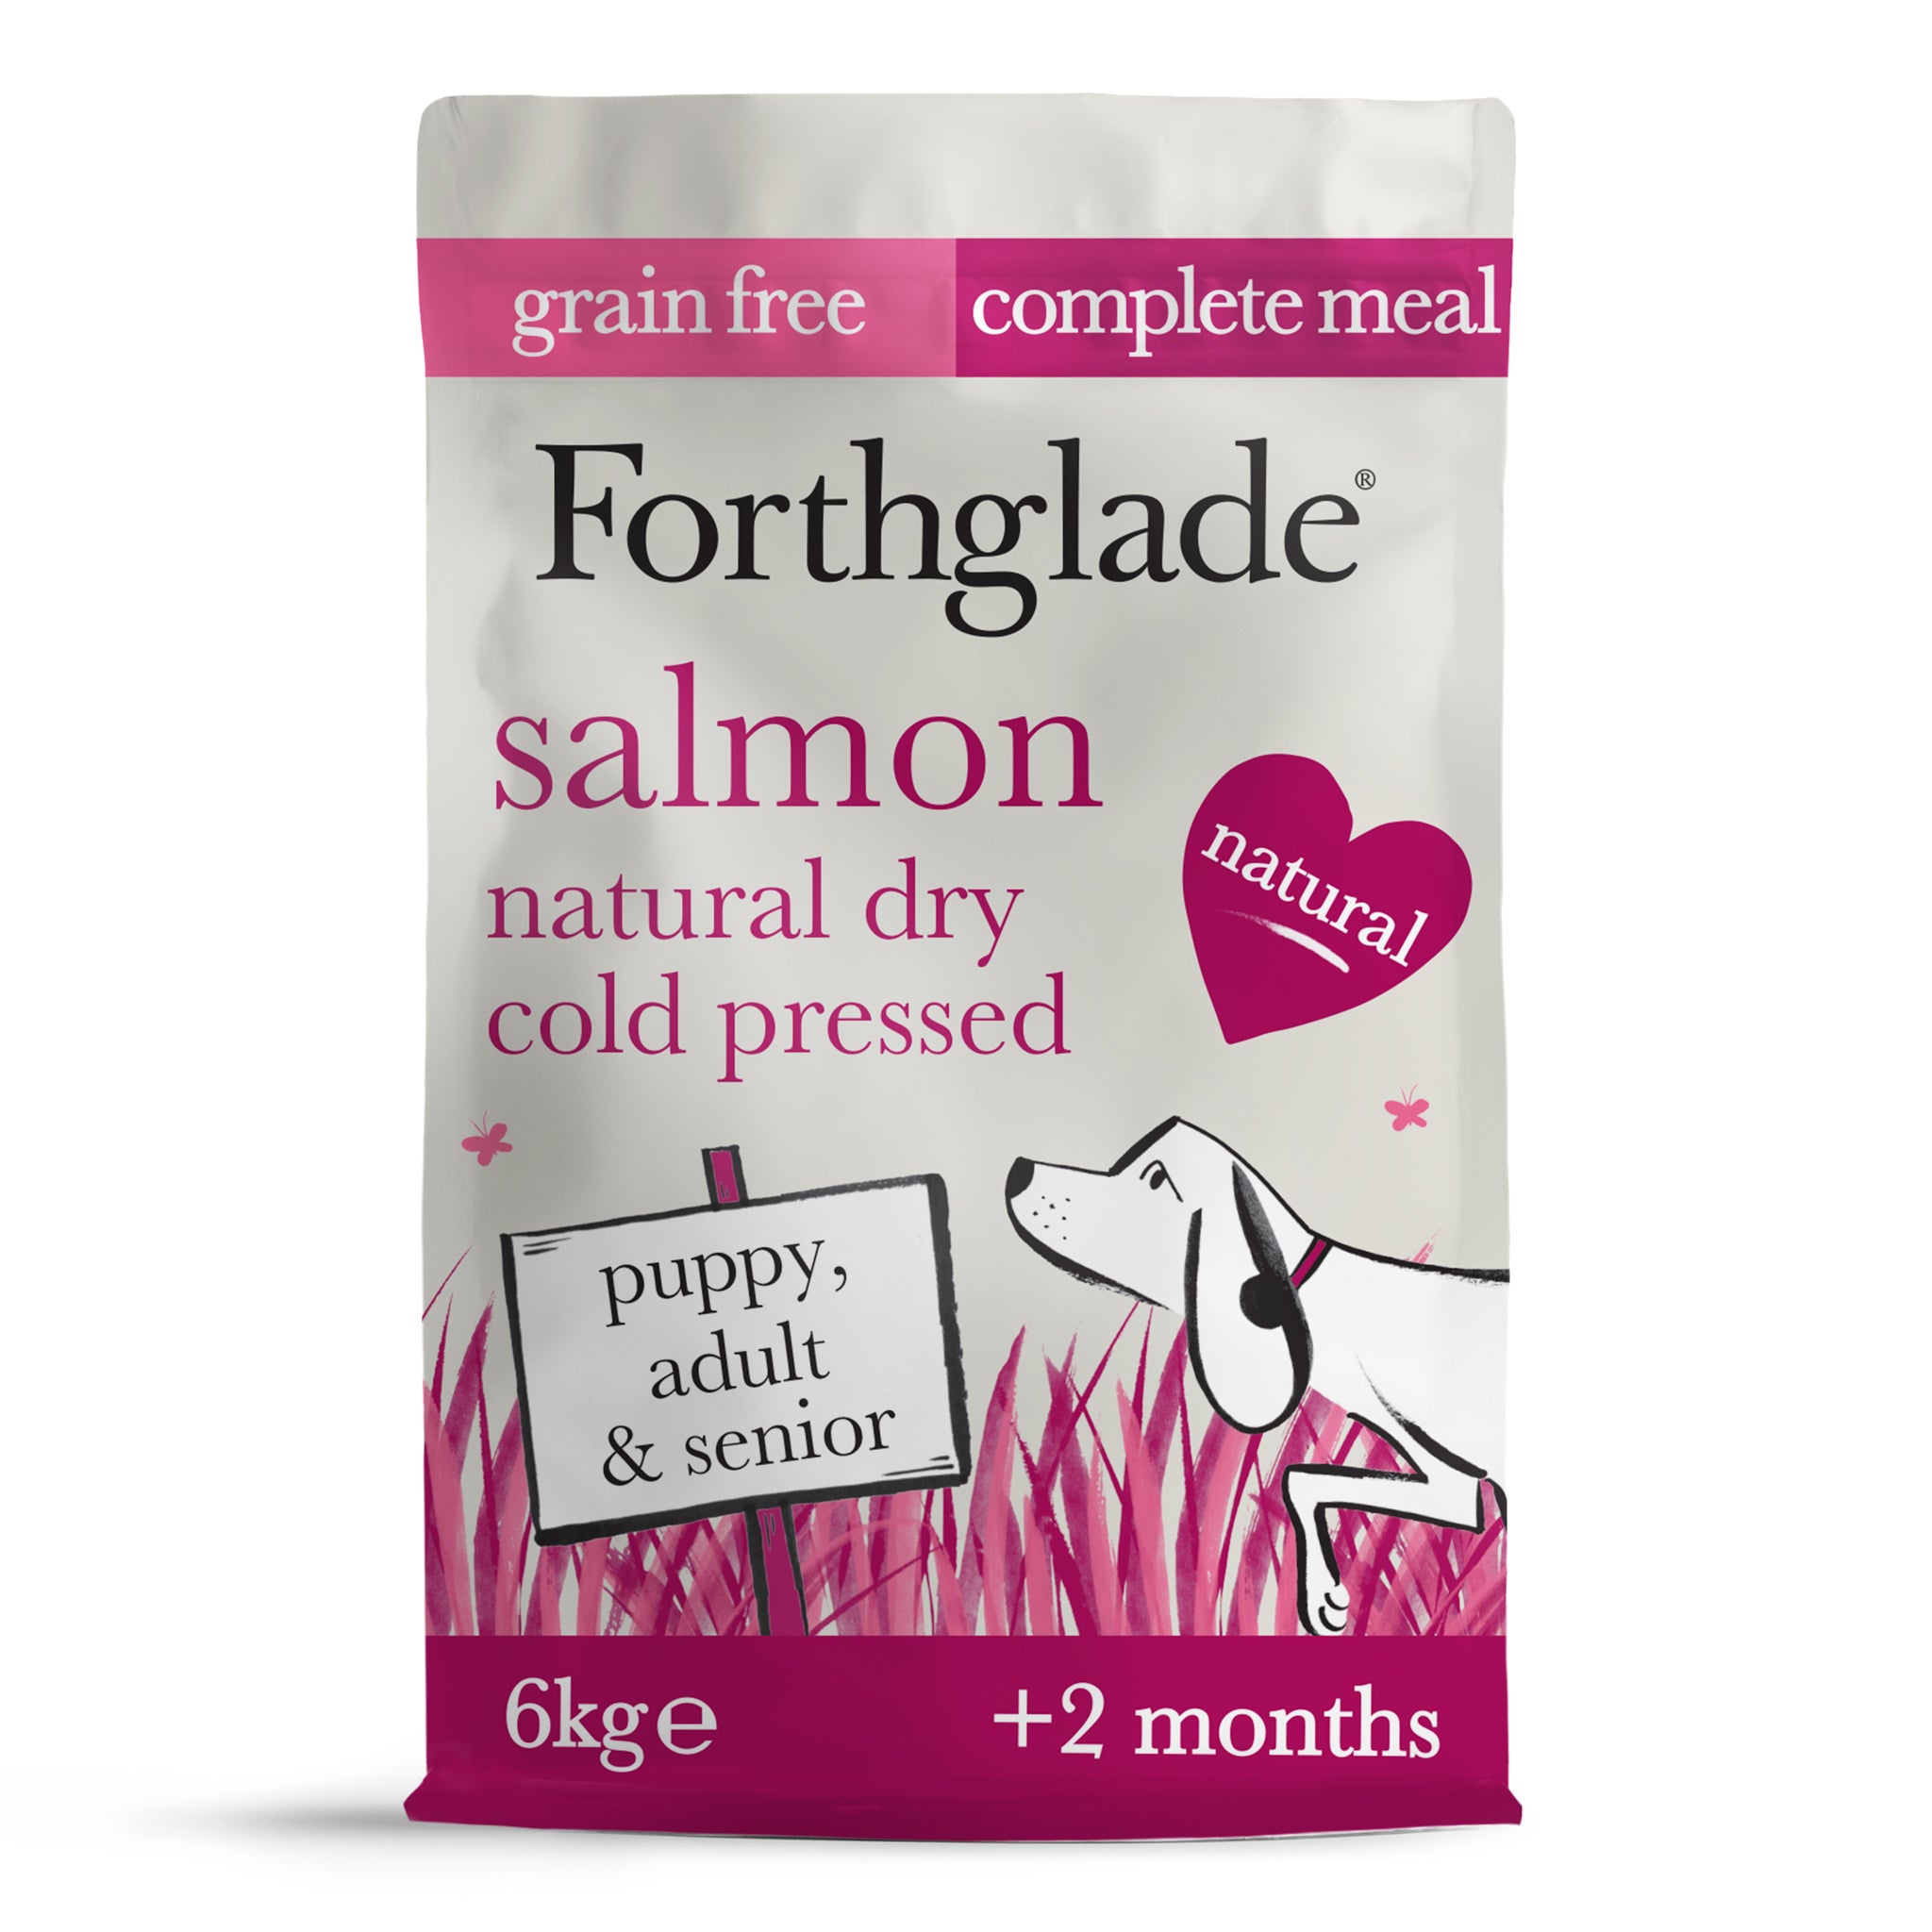 Image of Salmon Grain Free Cold Pressed Natural Dry Dog Food